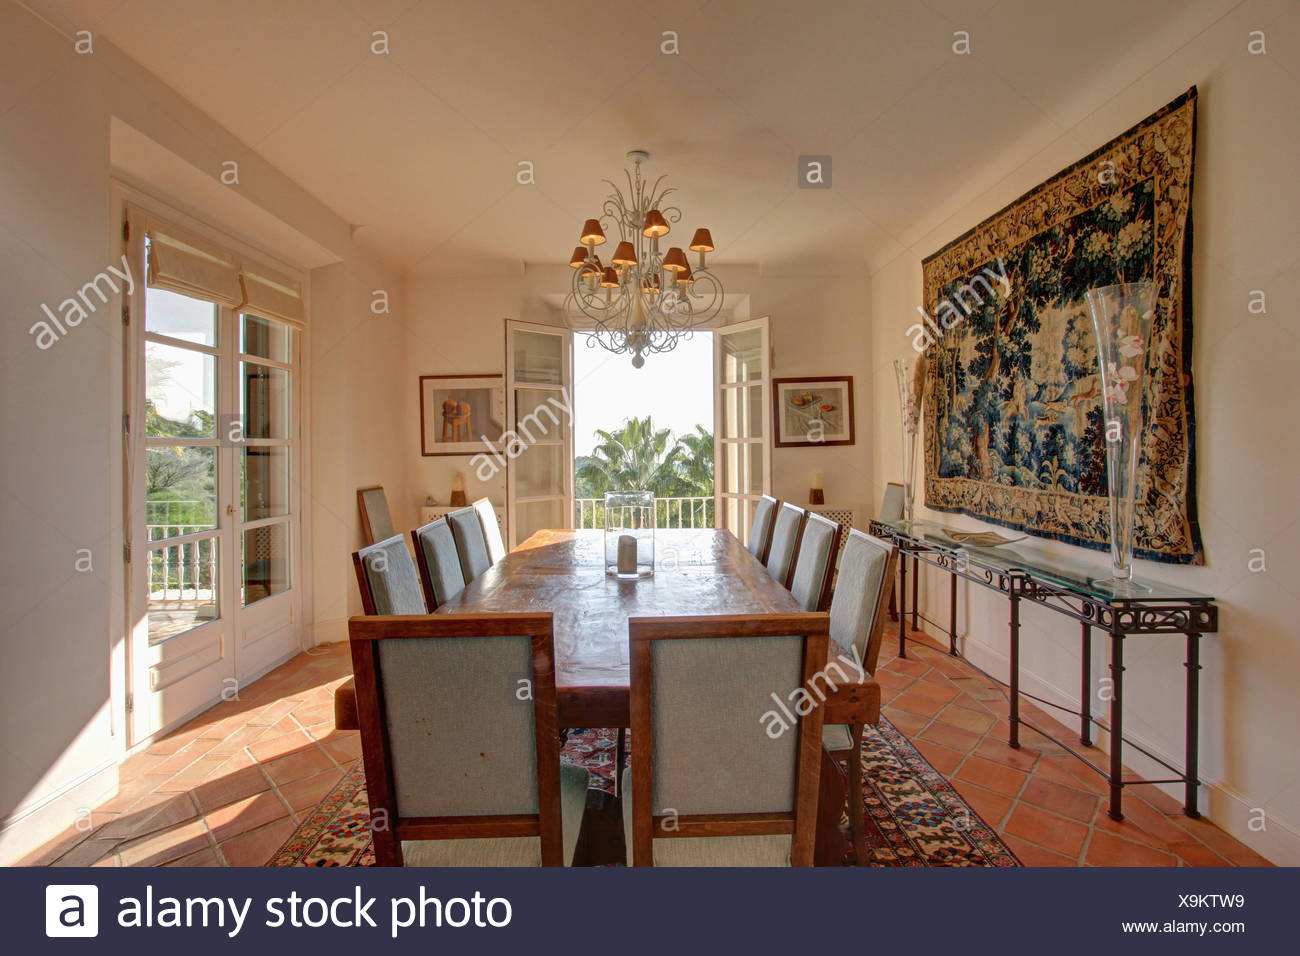 Large Tapestry On Wall Above Glass Metal Console Table In Sunny White Dining Room With Pale Wood Table And Upholstered Chairs Stock Photo Alamy